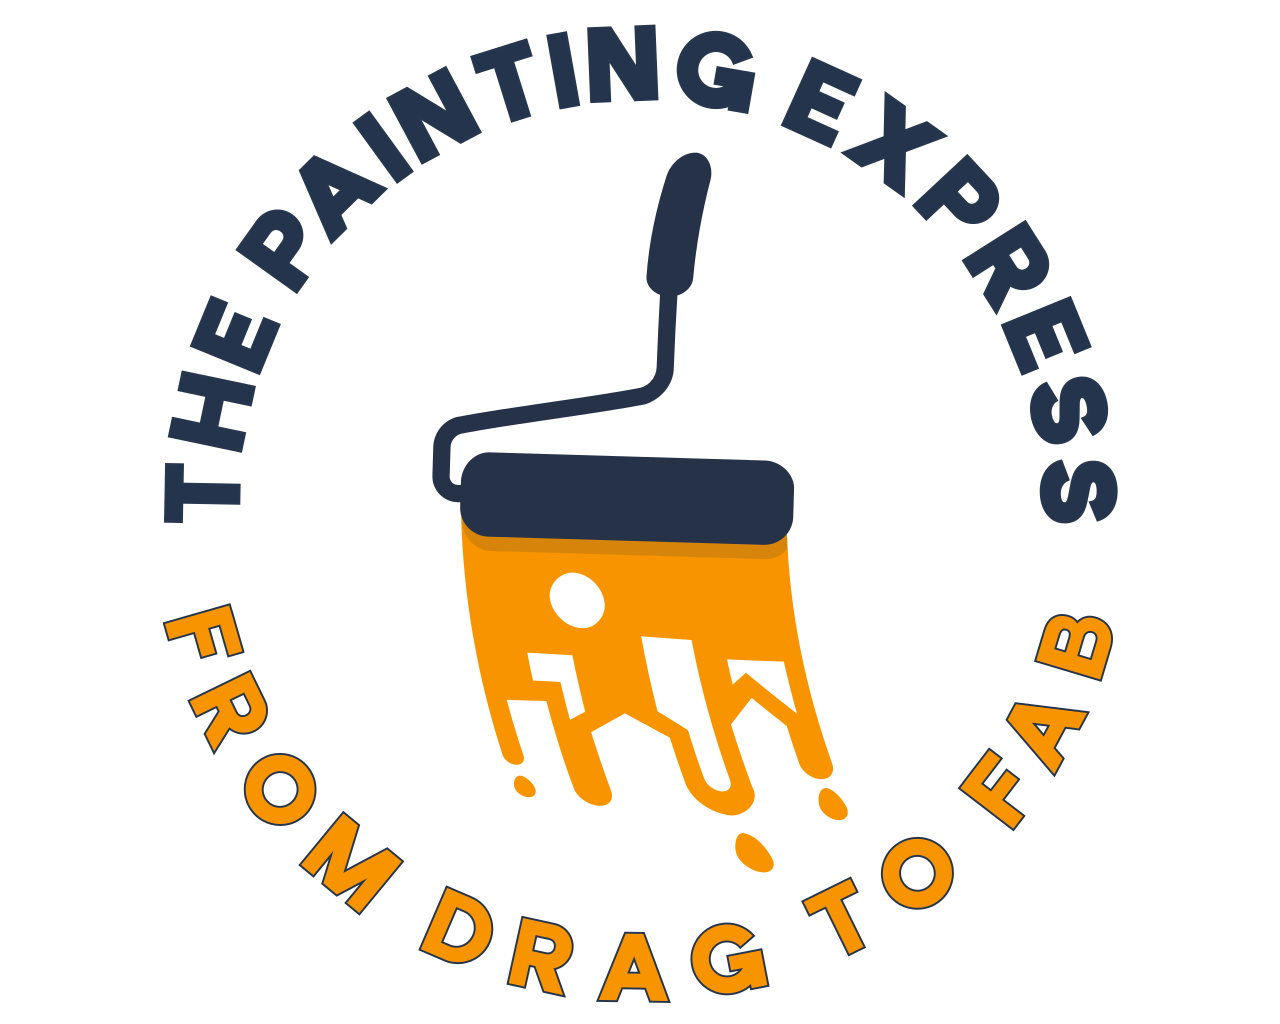 The Painting Express's logo